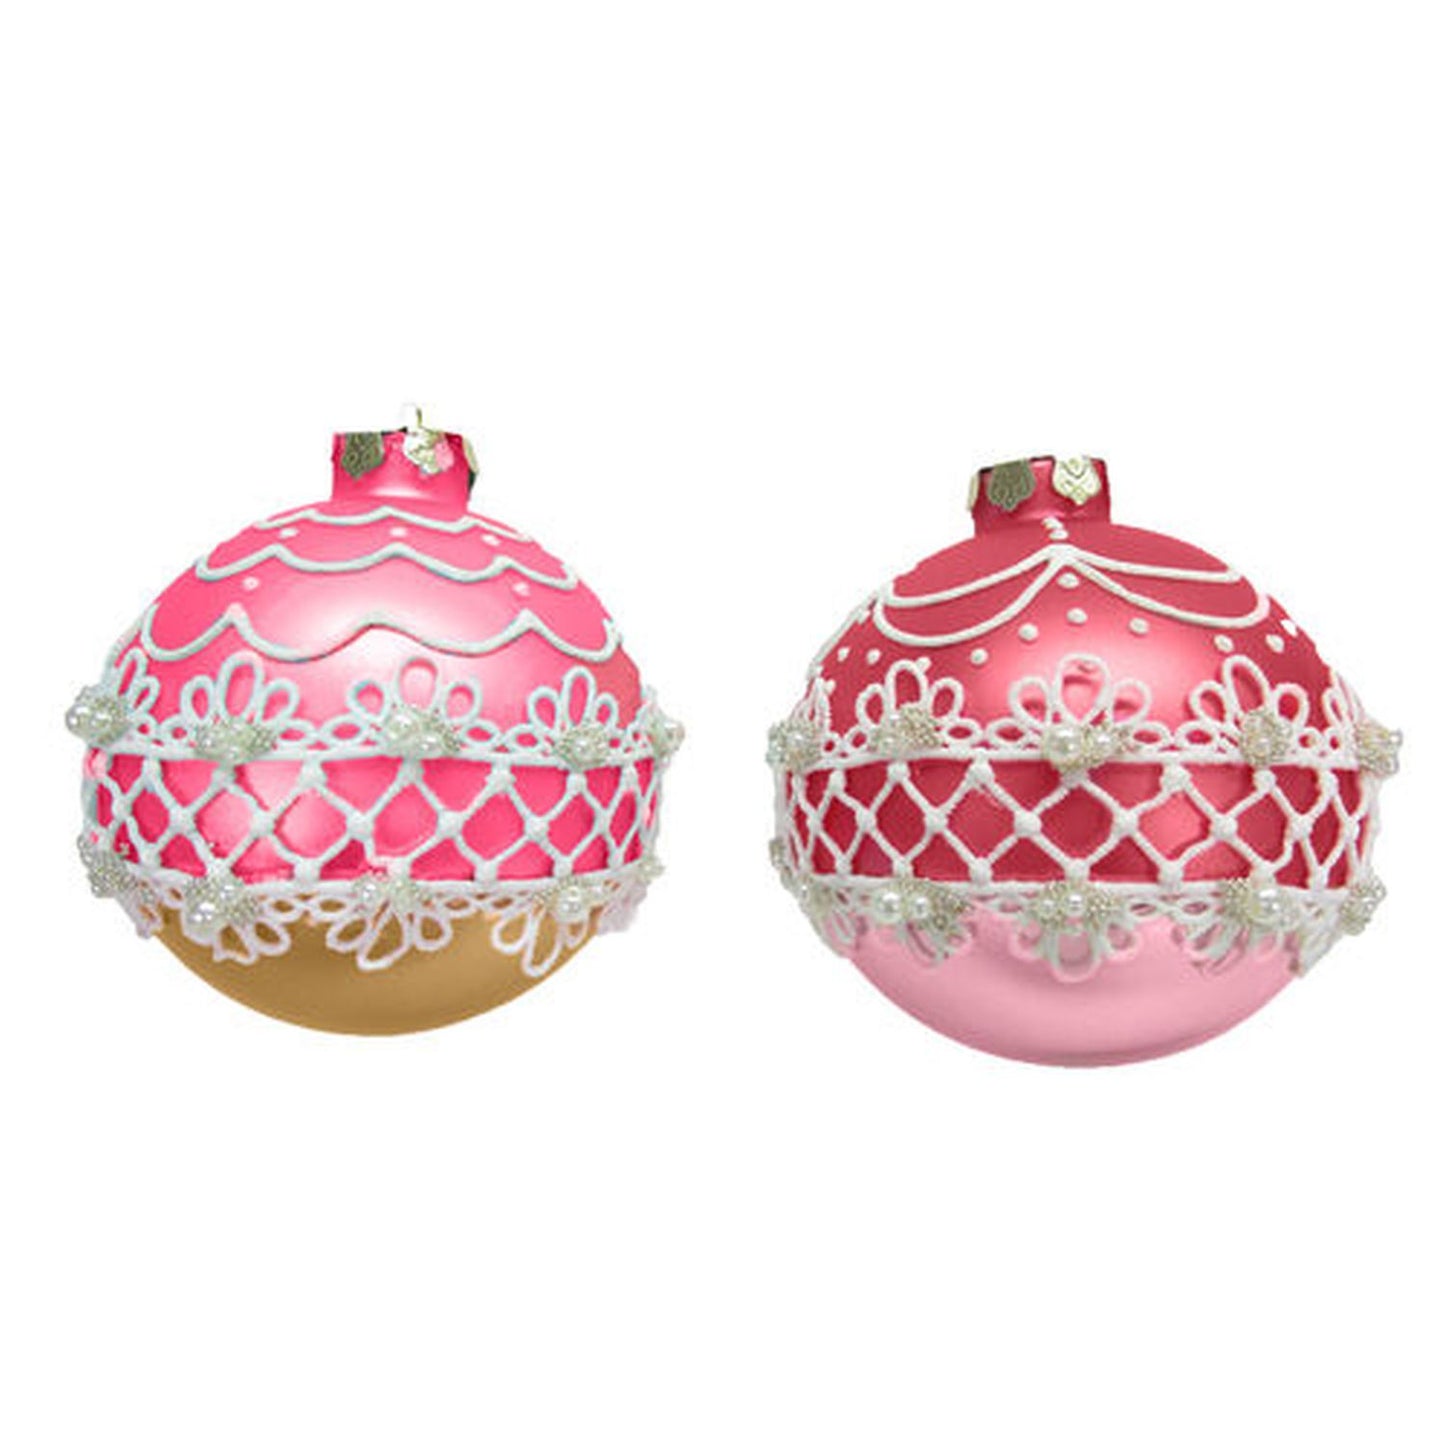 Nutcracker Sweet Shoppe Set Of 2 Assortment Pink Piped Glass Ornaments